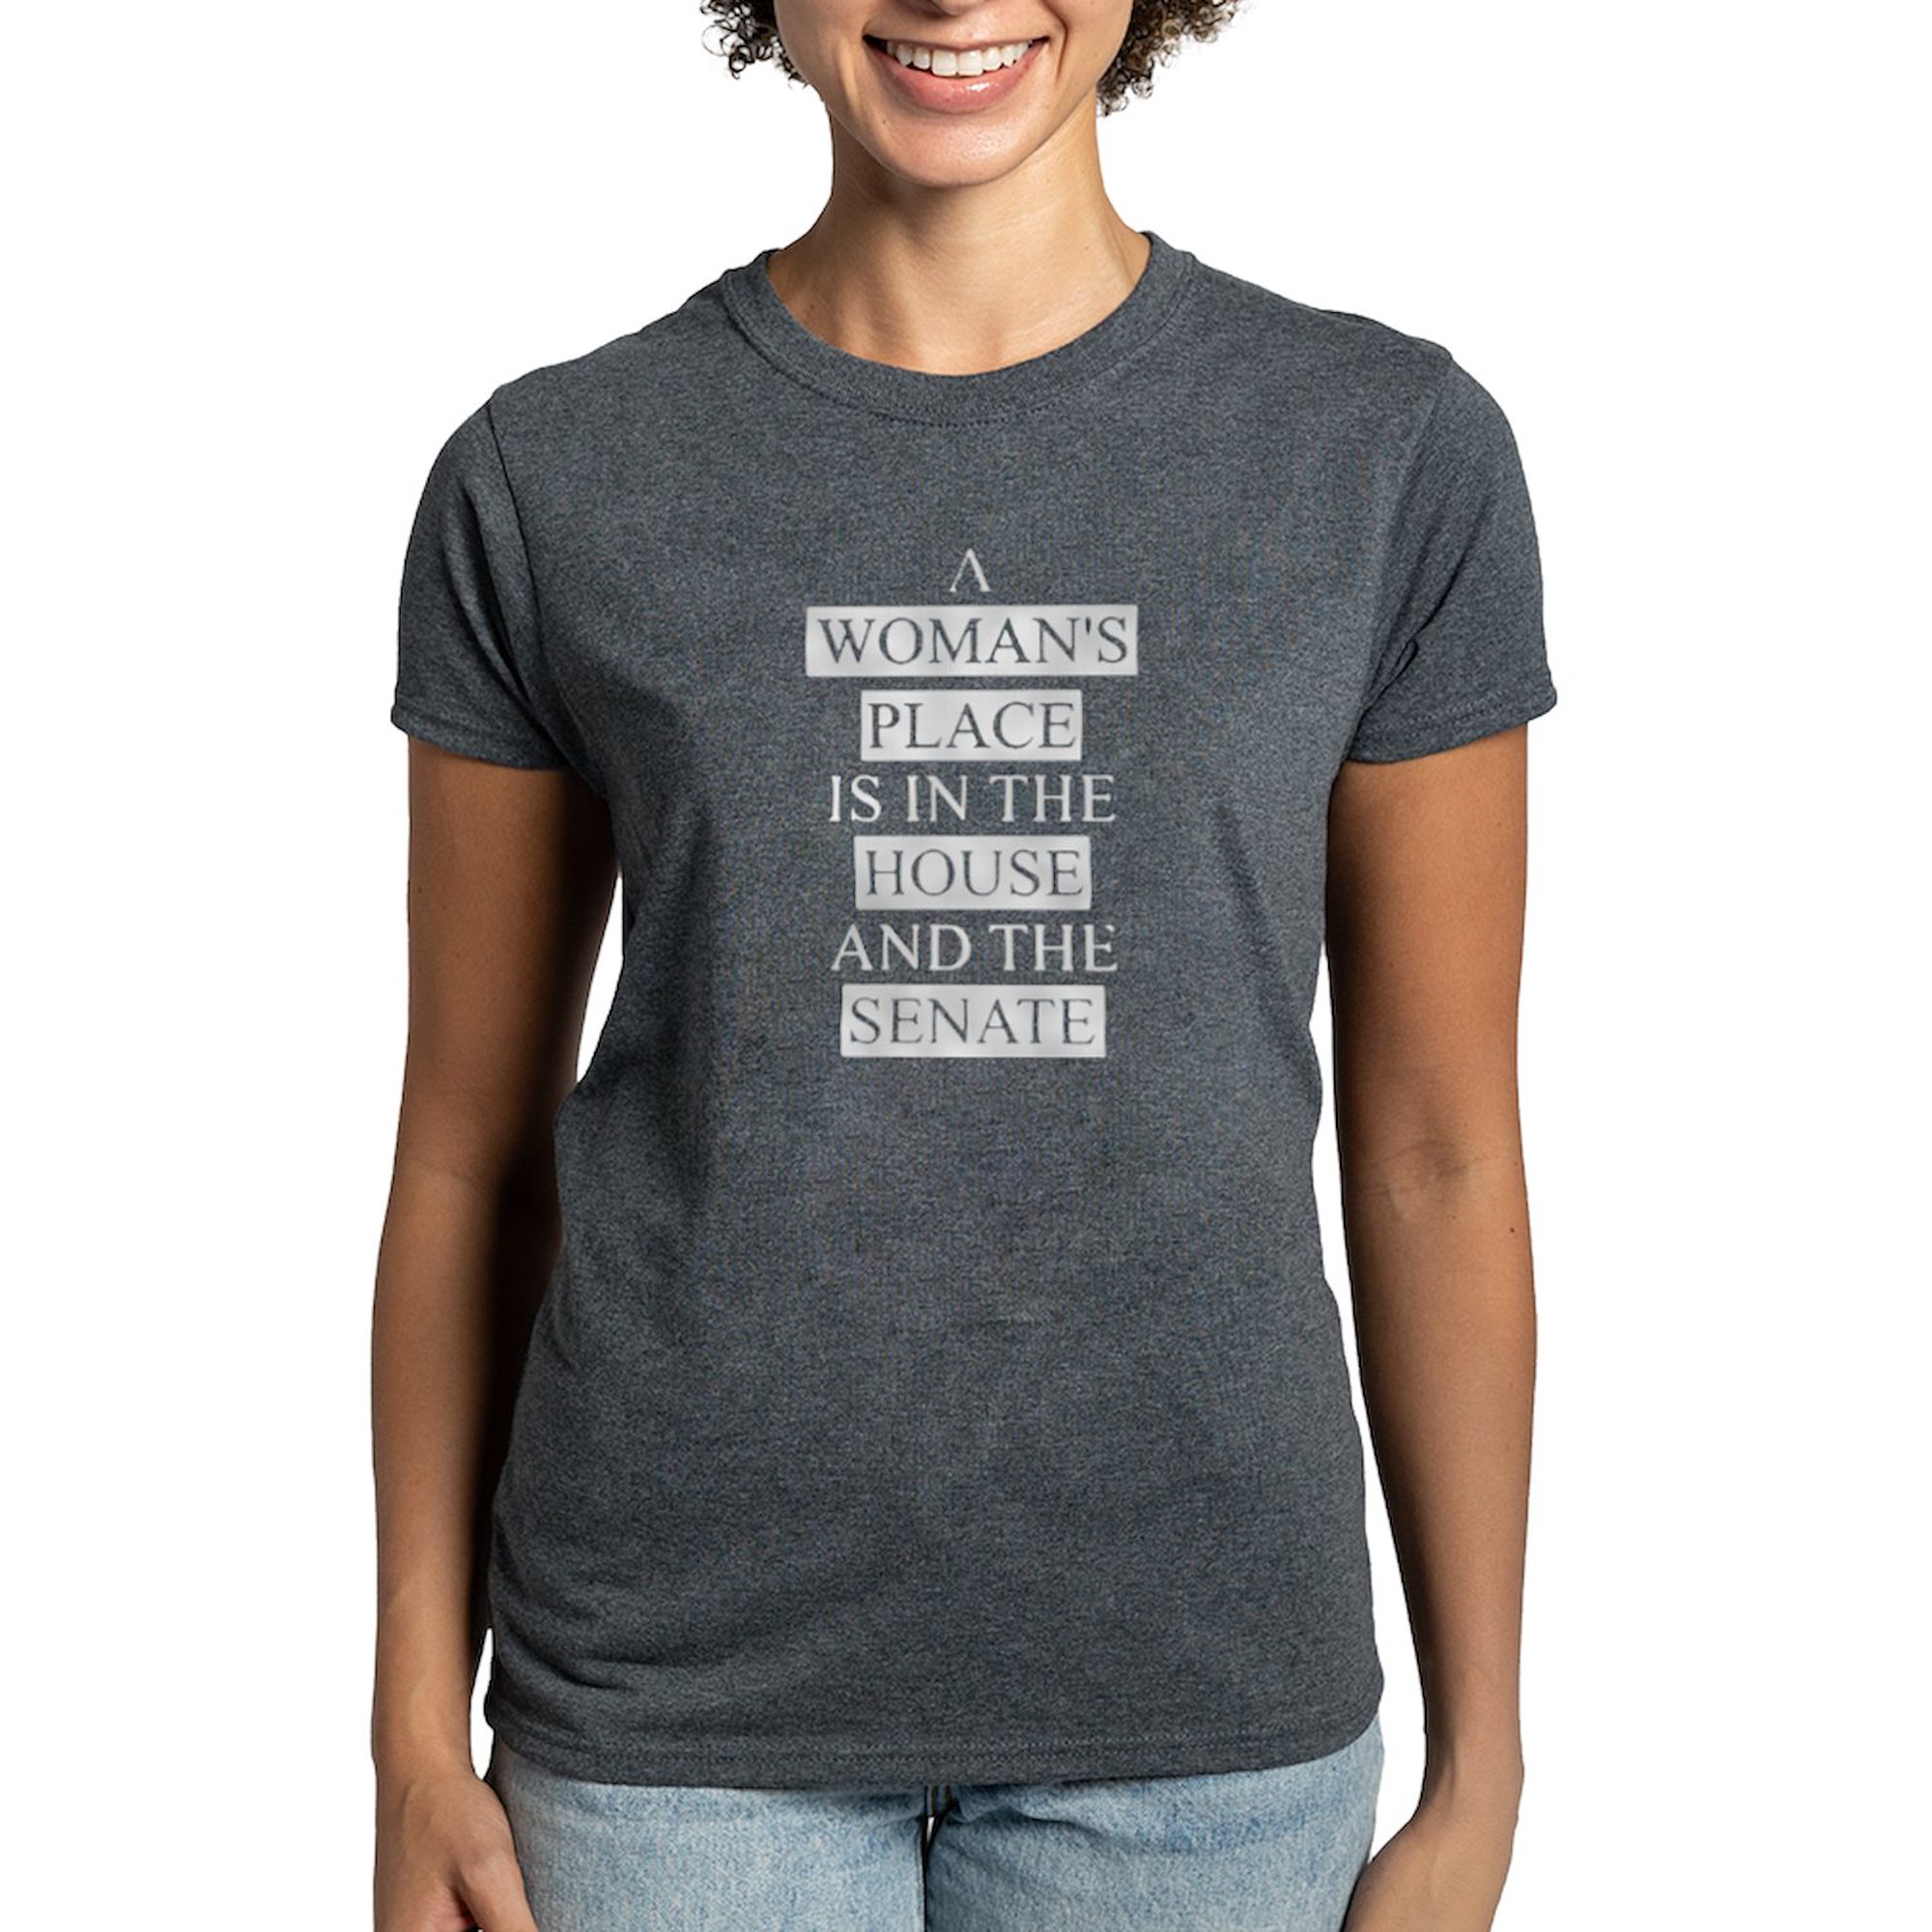 CafePress - A Woman Place Is In The House Shirt T Shirt - Women's Traditional Fit Dark T-Shirt - image 1 of 4